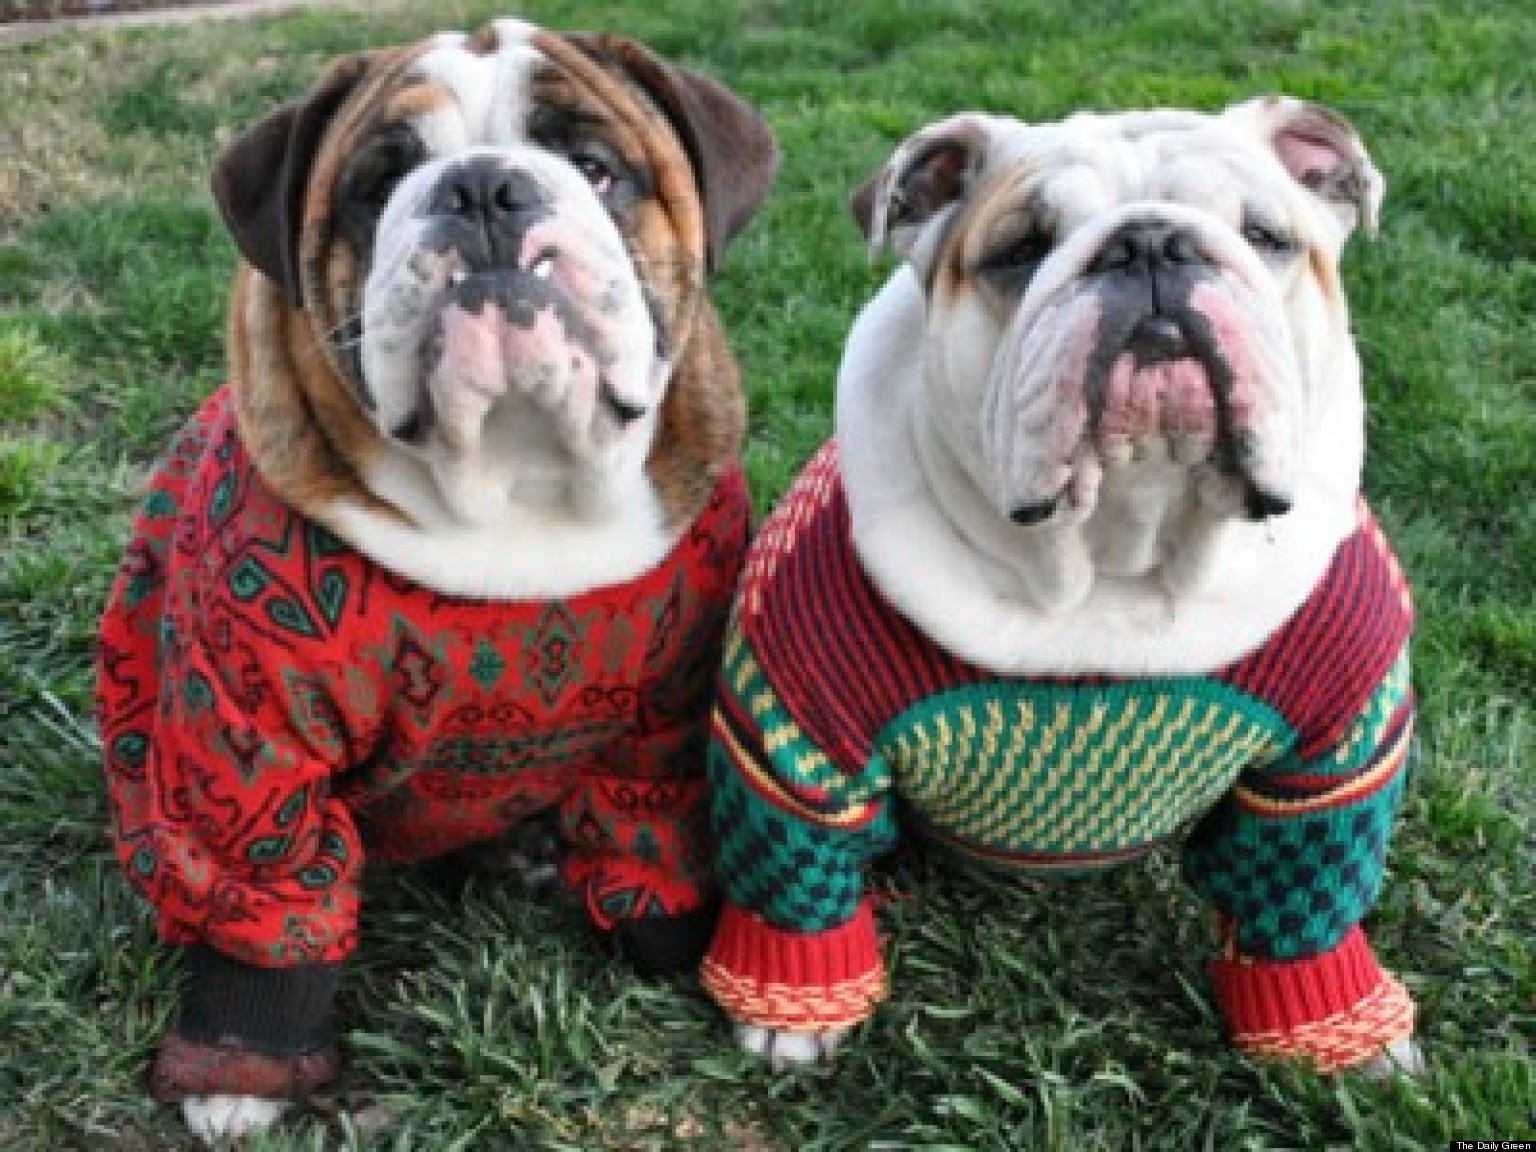 sweater ugly sweaters dog dogs winter holiday animals furry friends warm keep puppies showing funny jumpers contest adorable pets teen